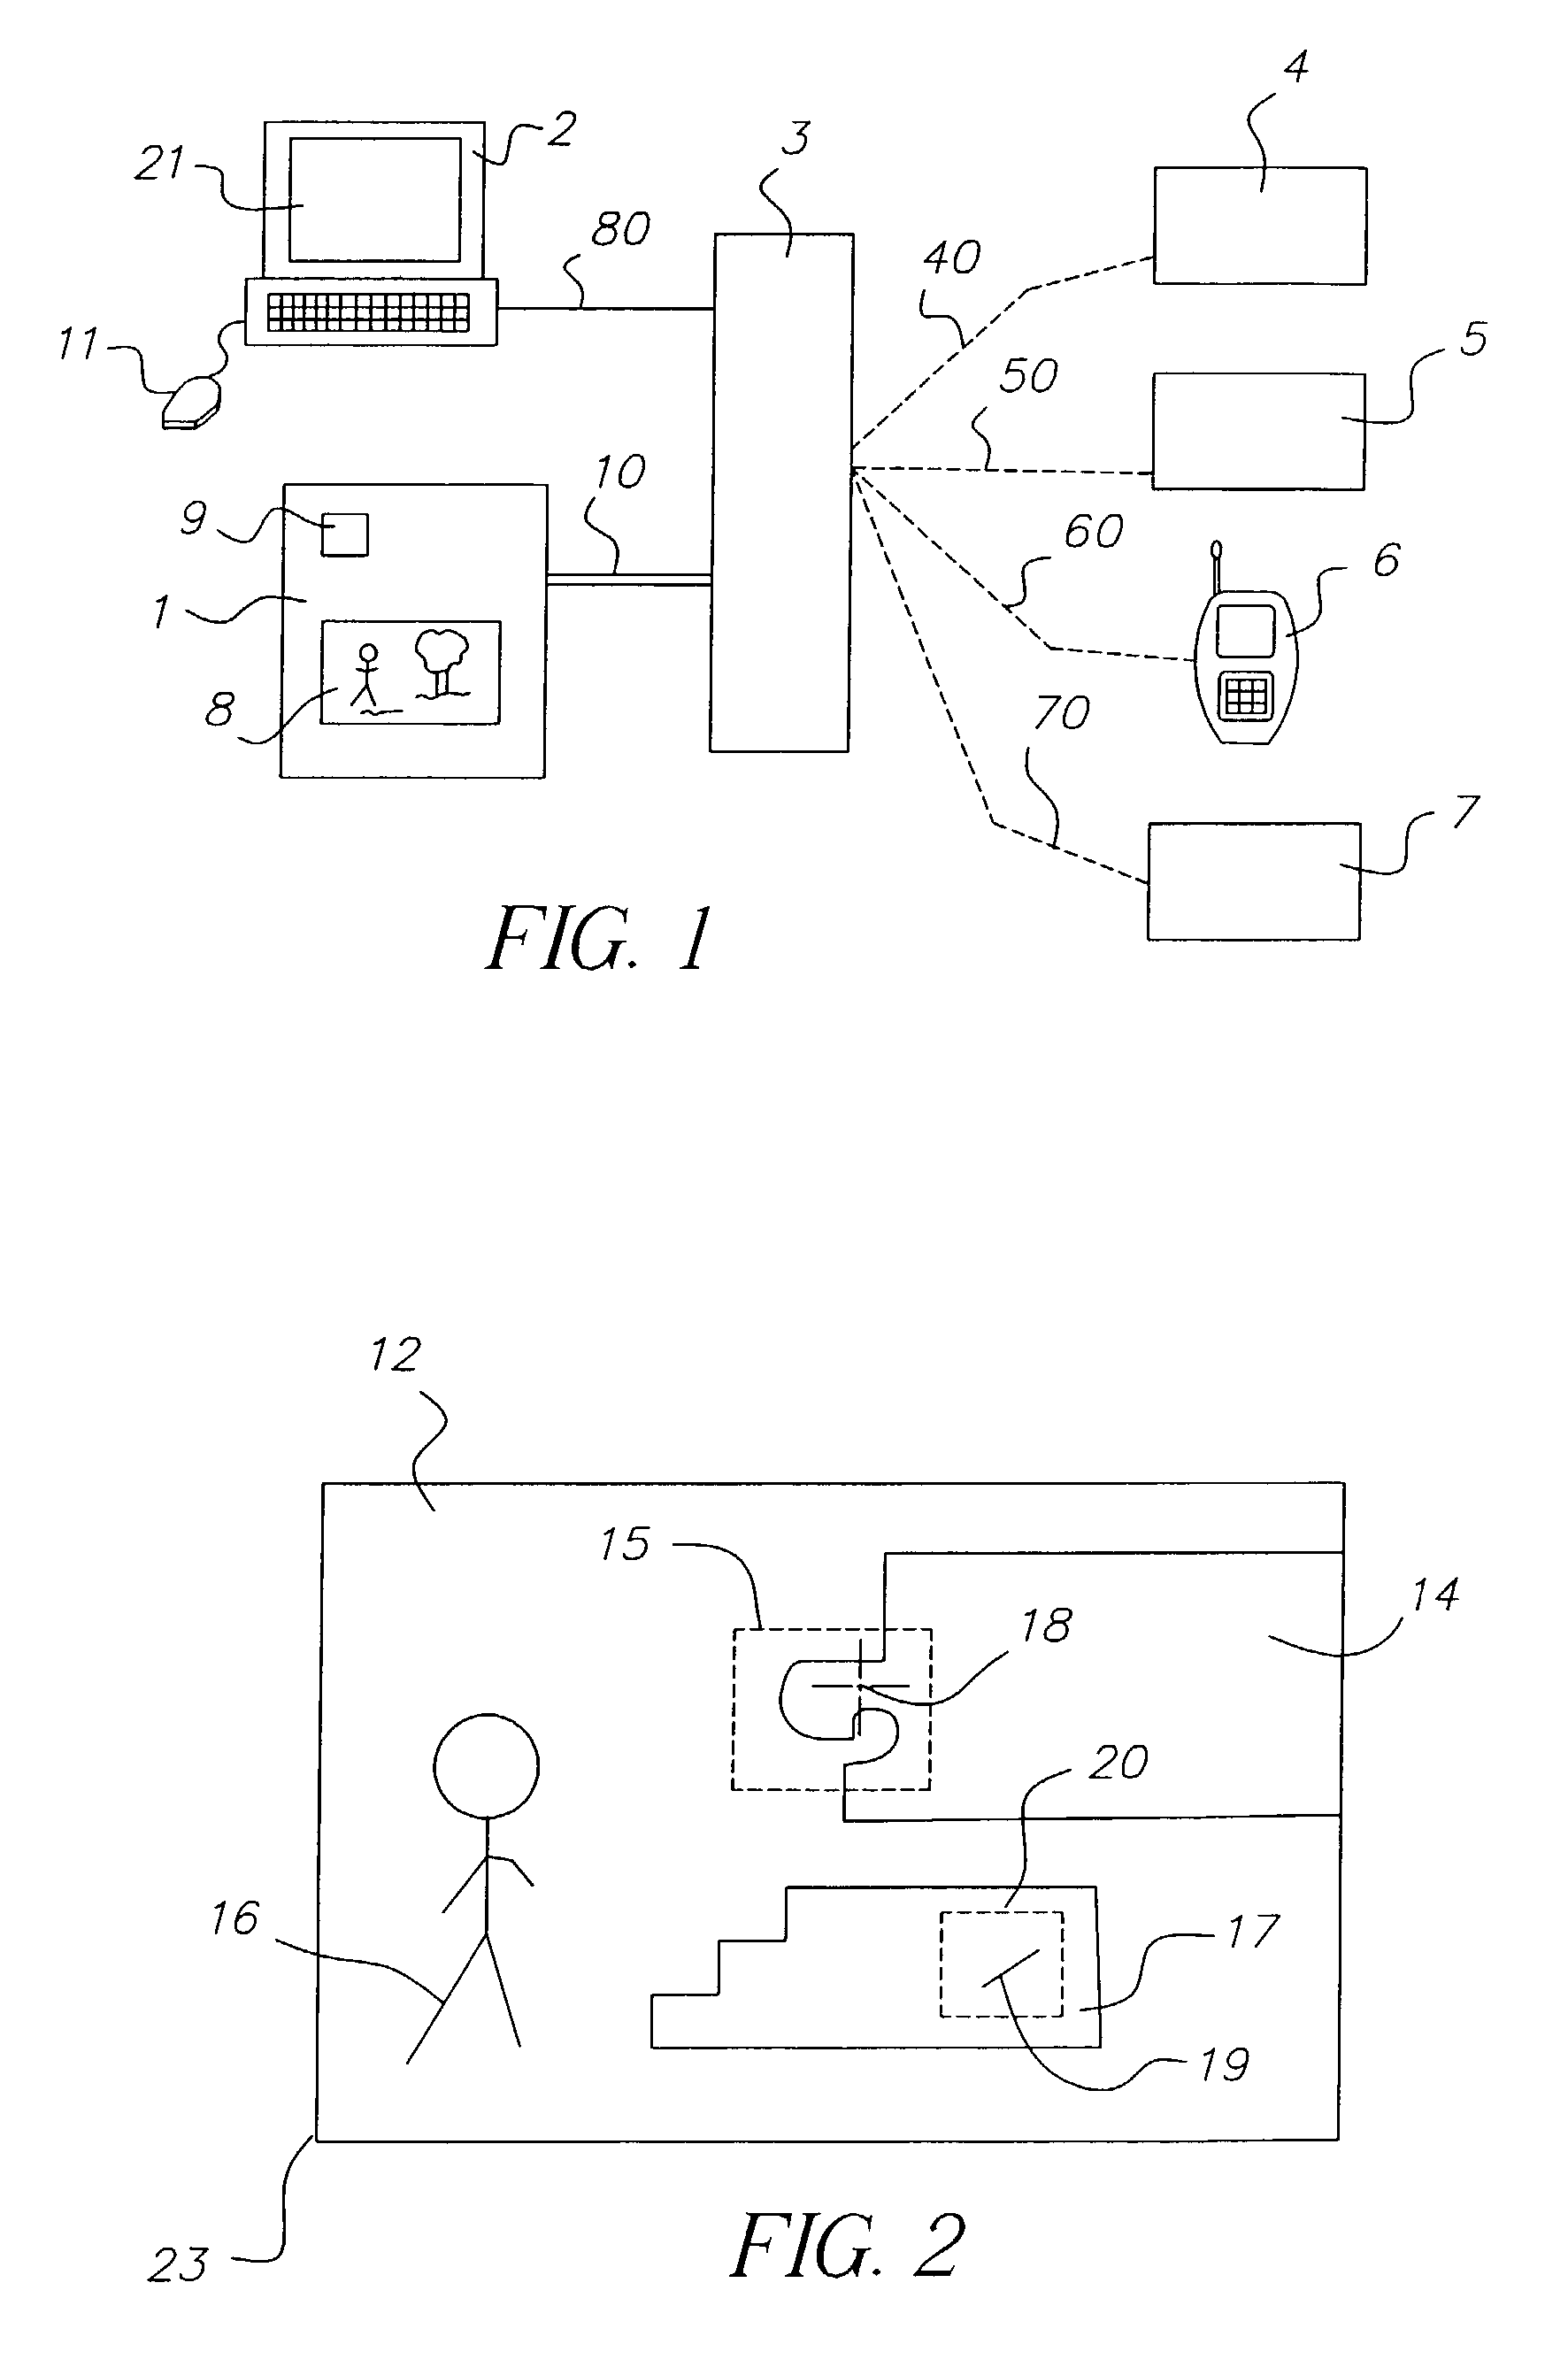 Method for selecting and displaying a subject of interest in a still digital image